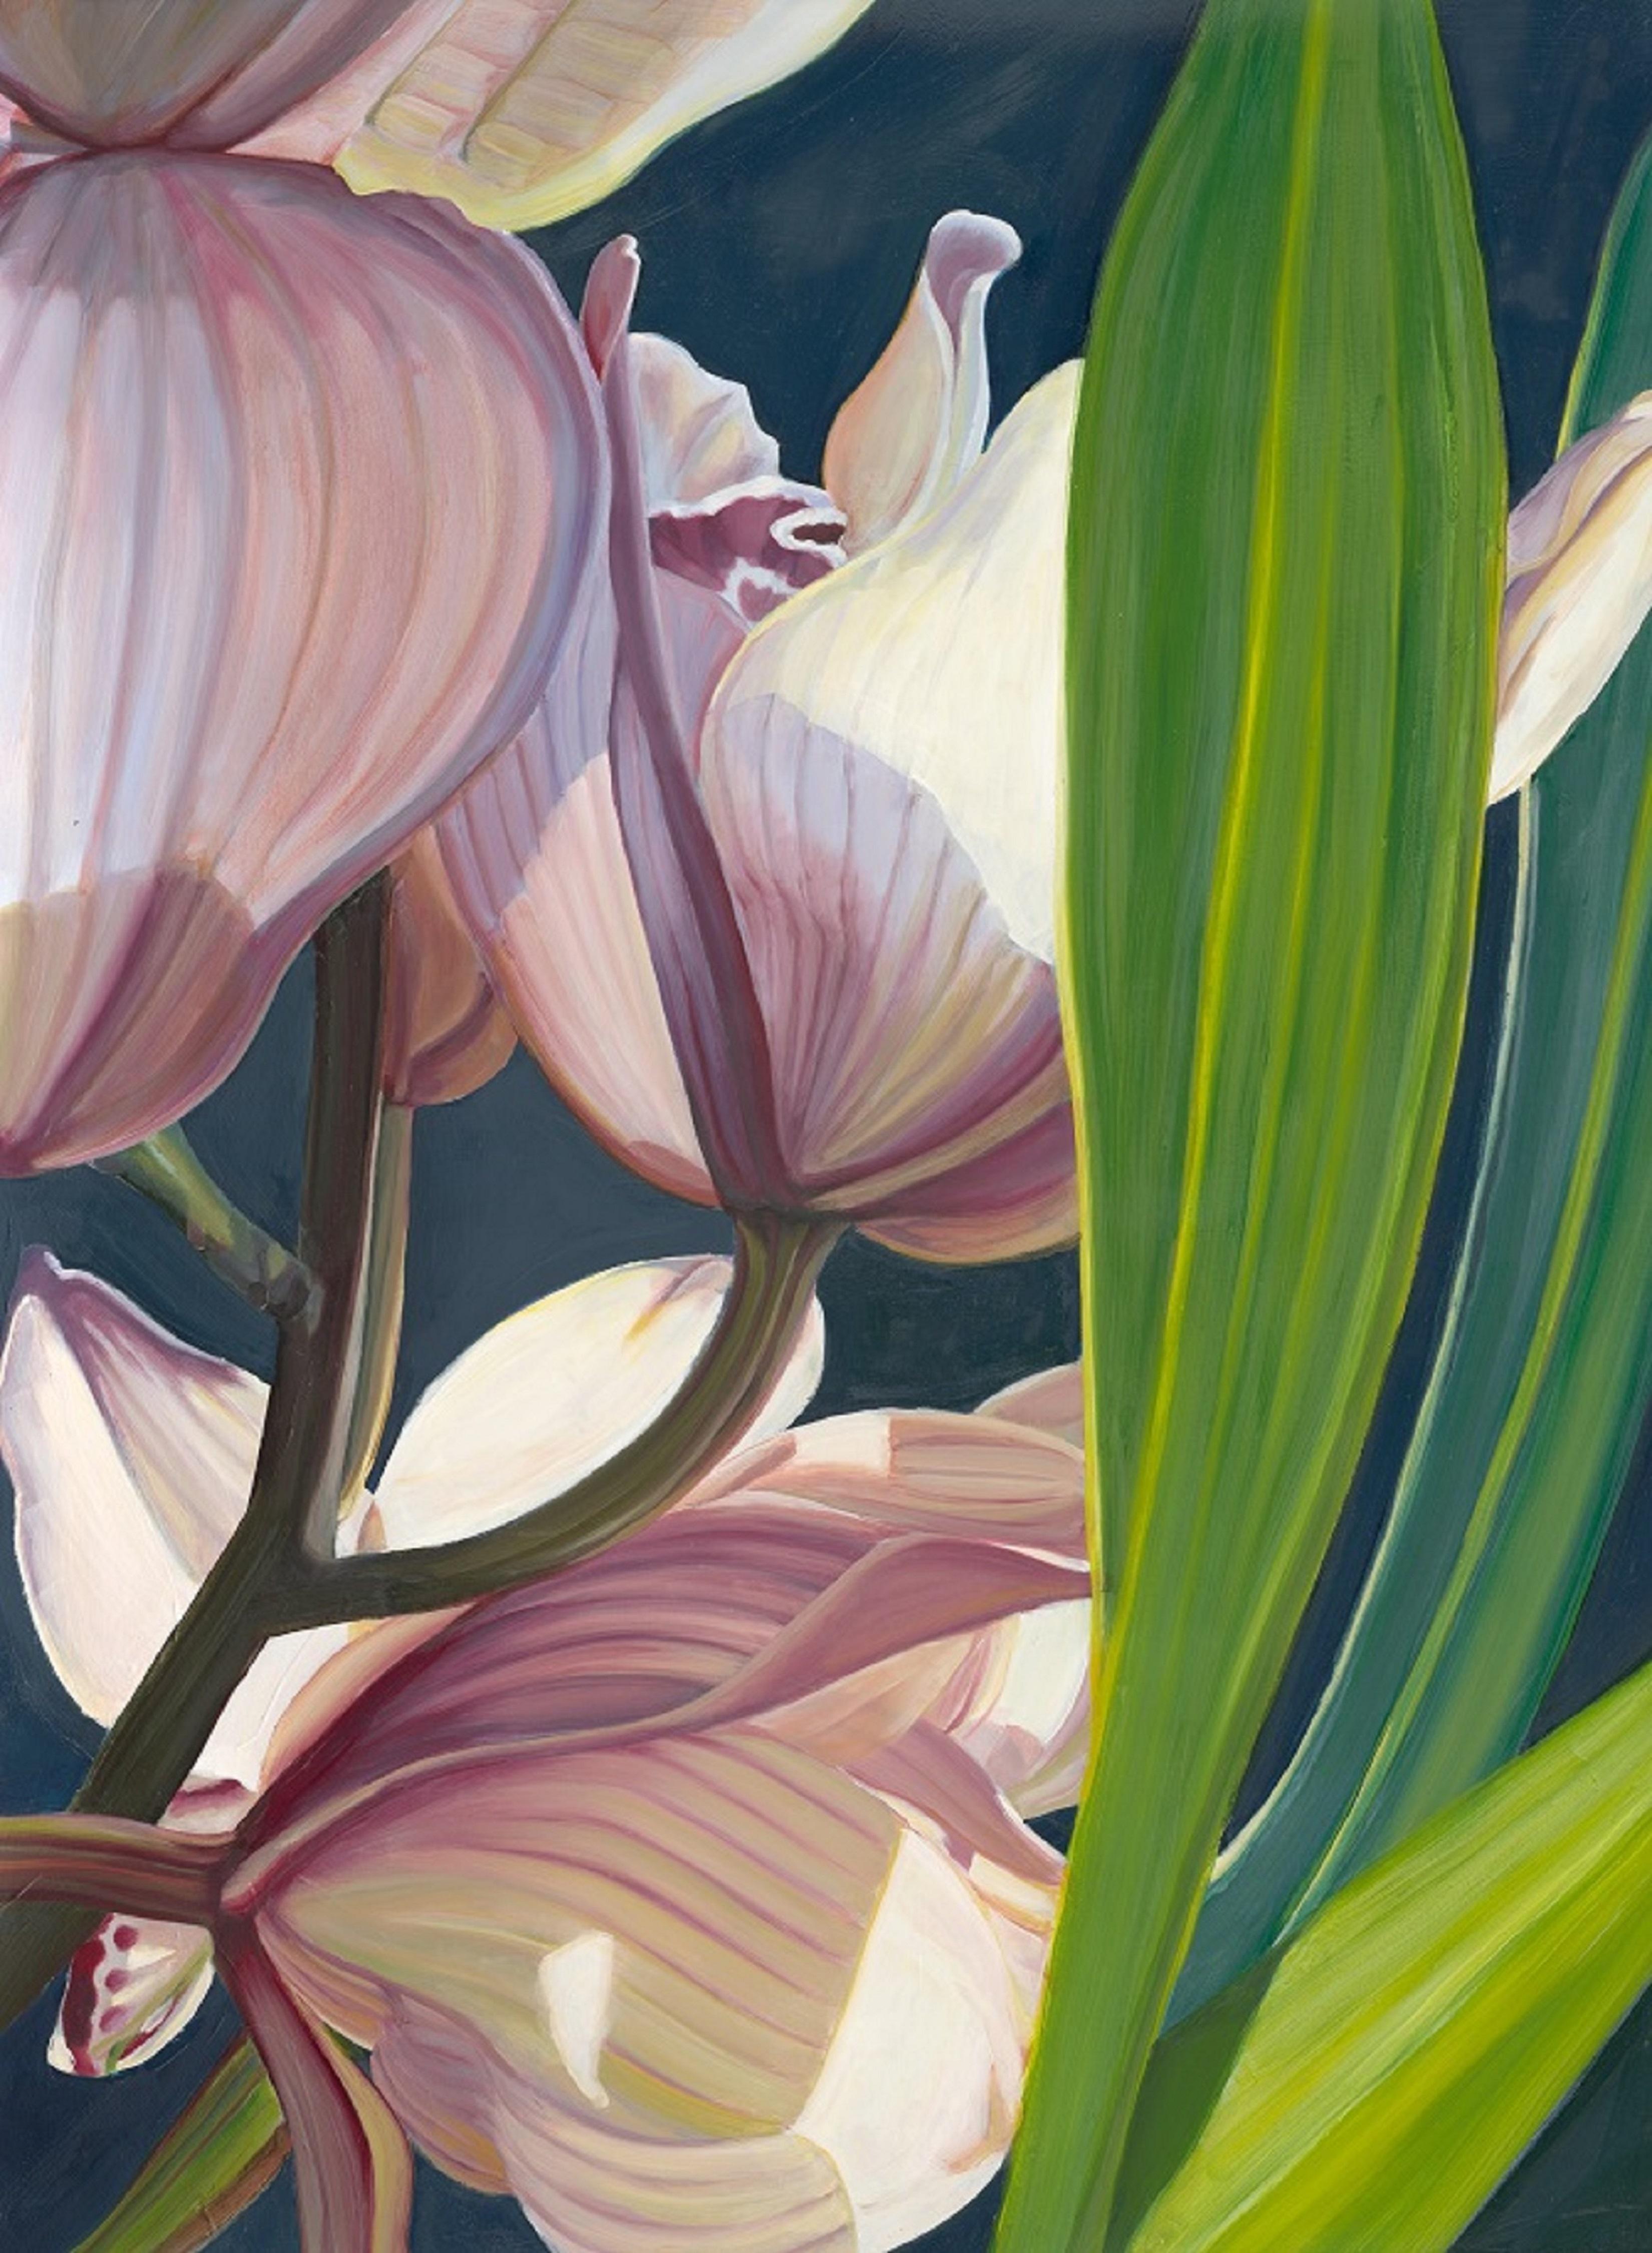 Painting accentuates the translucency of the petals and the intensity of the light filtering through the color in the petals, allowing details in the shadows to emerge and dramatically setting off the blue green stem. Oil on paper, varnished,